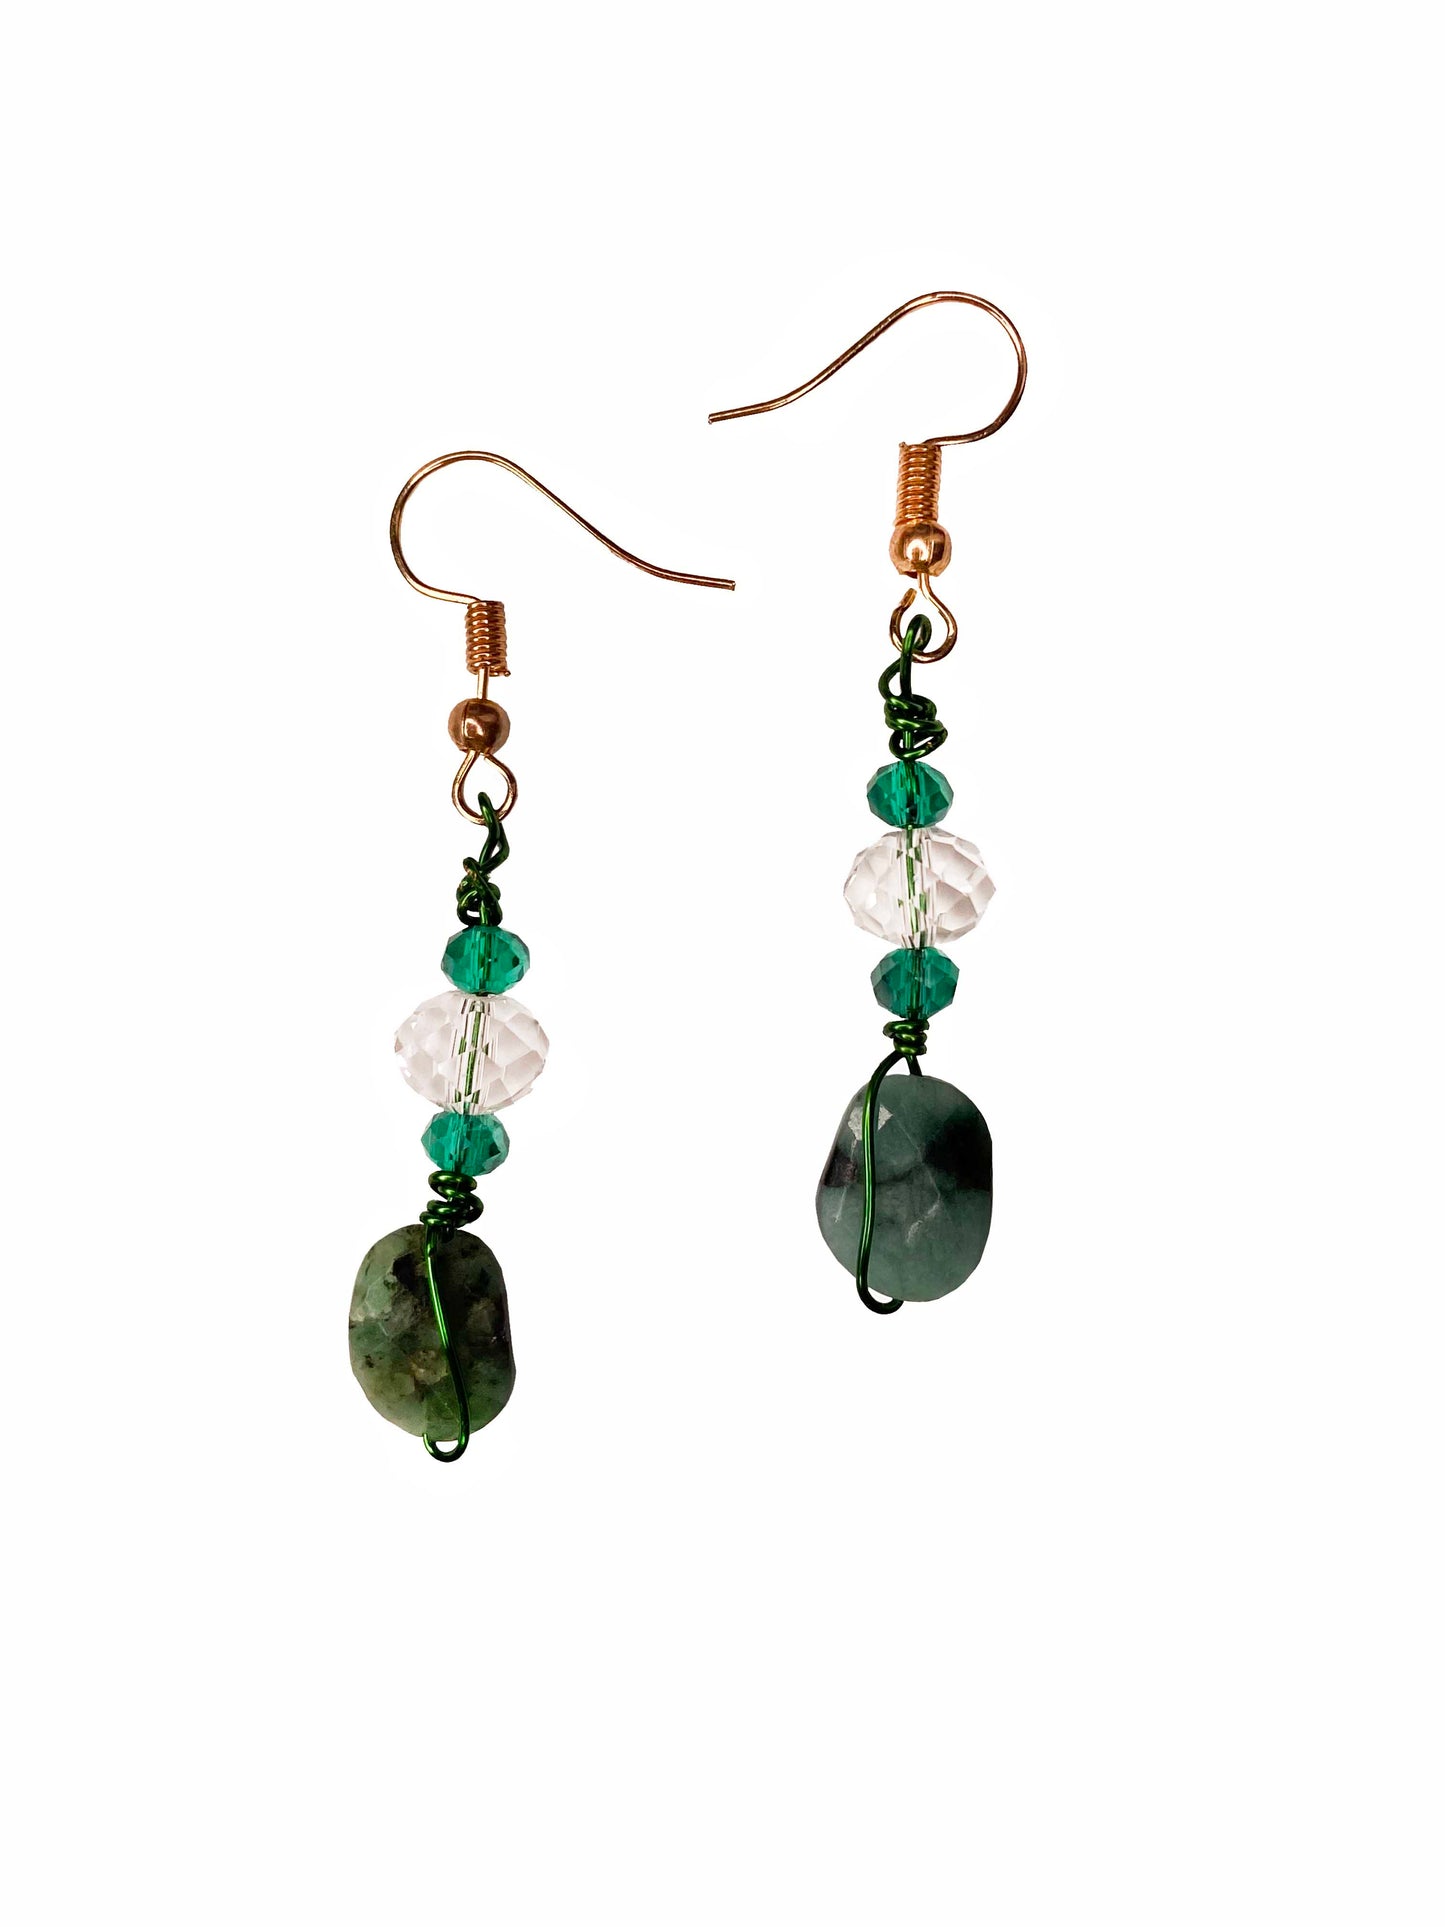 handmade wire wrapped emerald earrings with crystal beads.